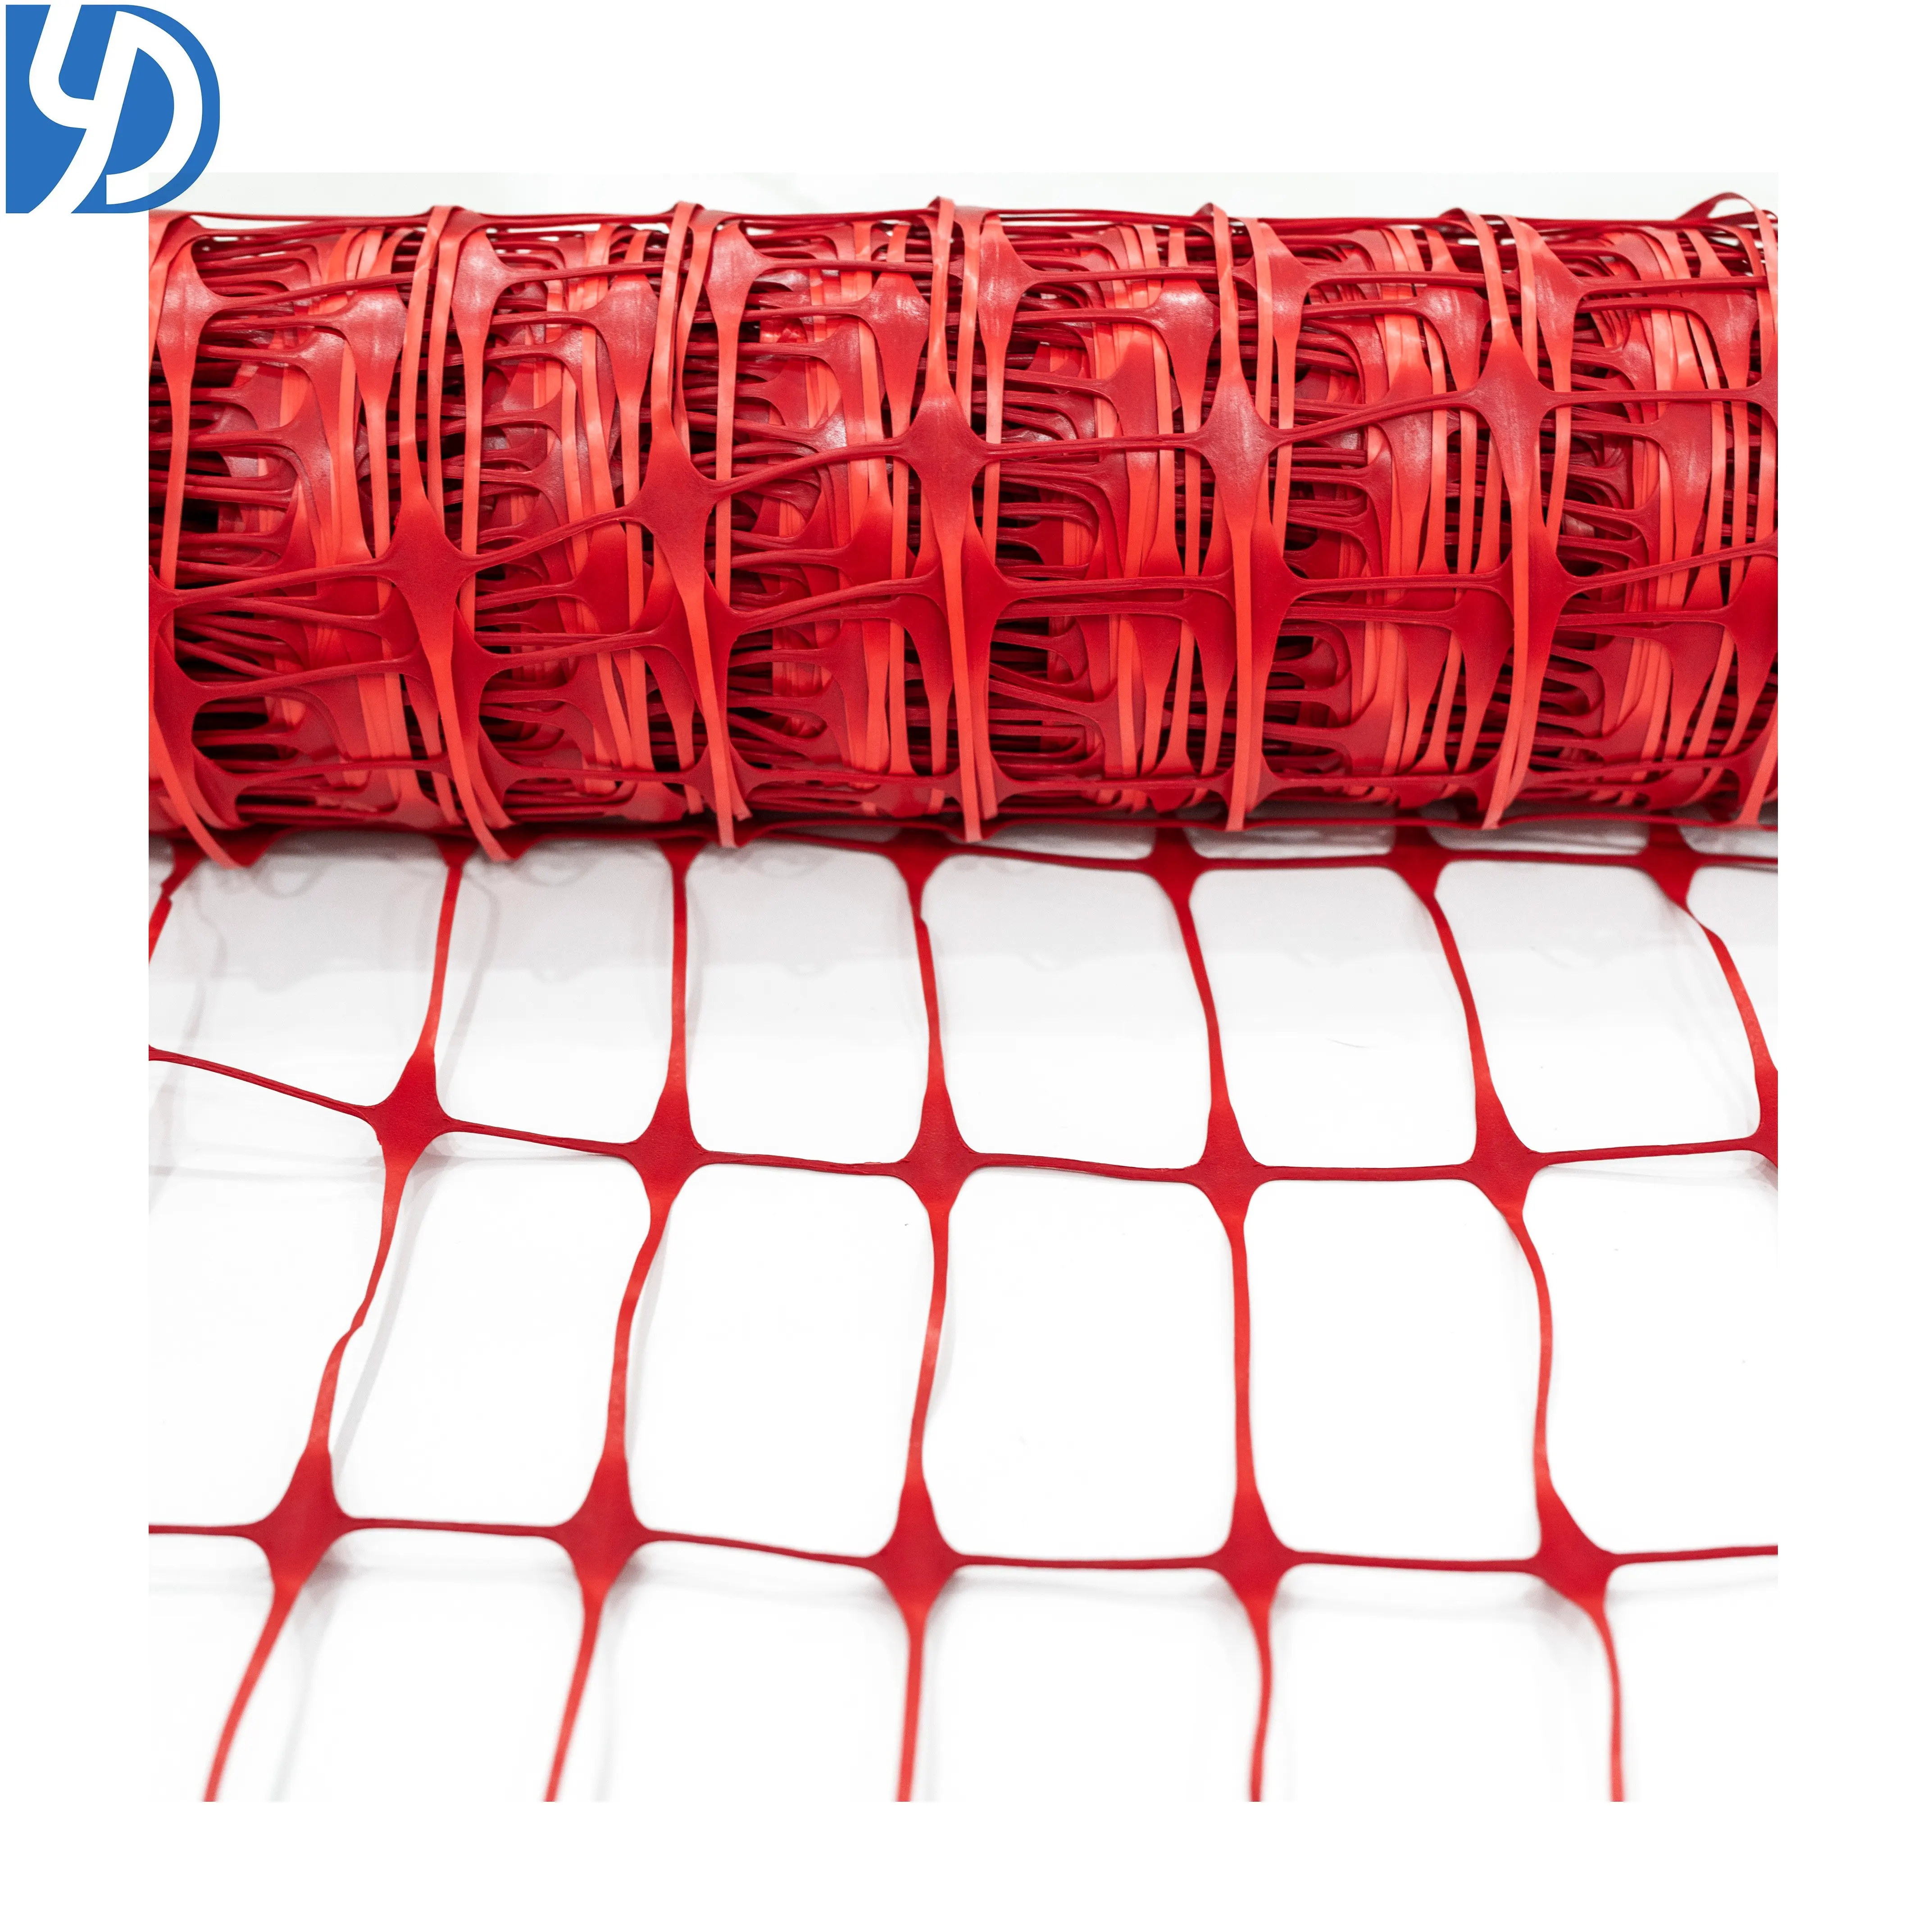 Plastic Safety Fence Mesh Net Orange Barrier Fence/ HDPE Construction Safety Netting/ Snow Guard Warning Barrier Garden Mesh